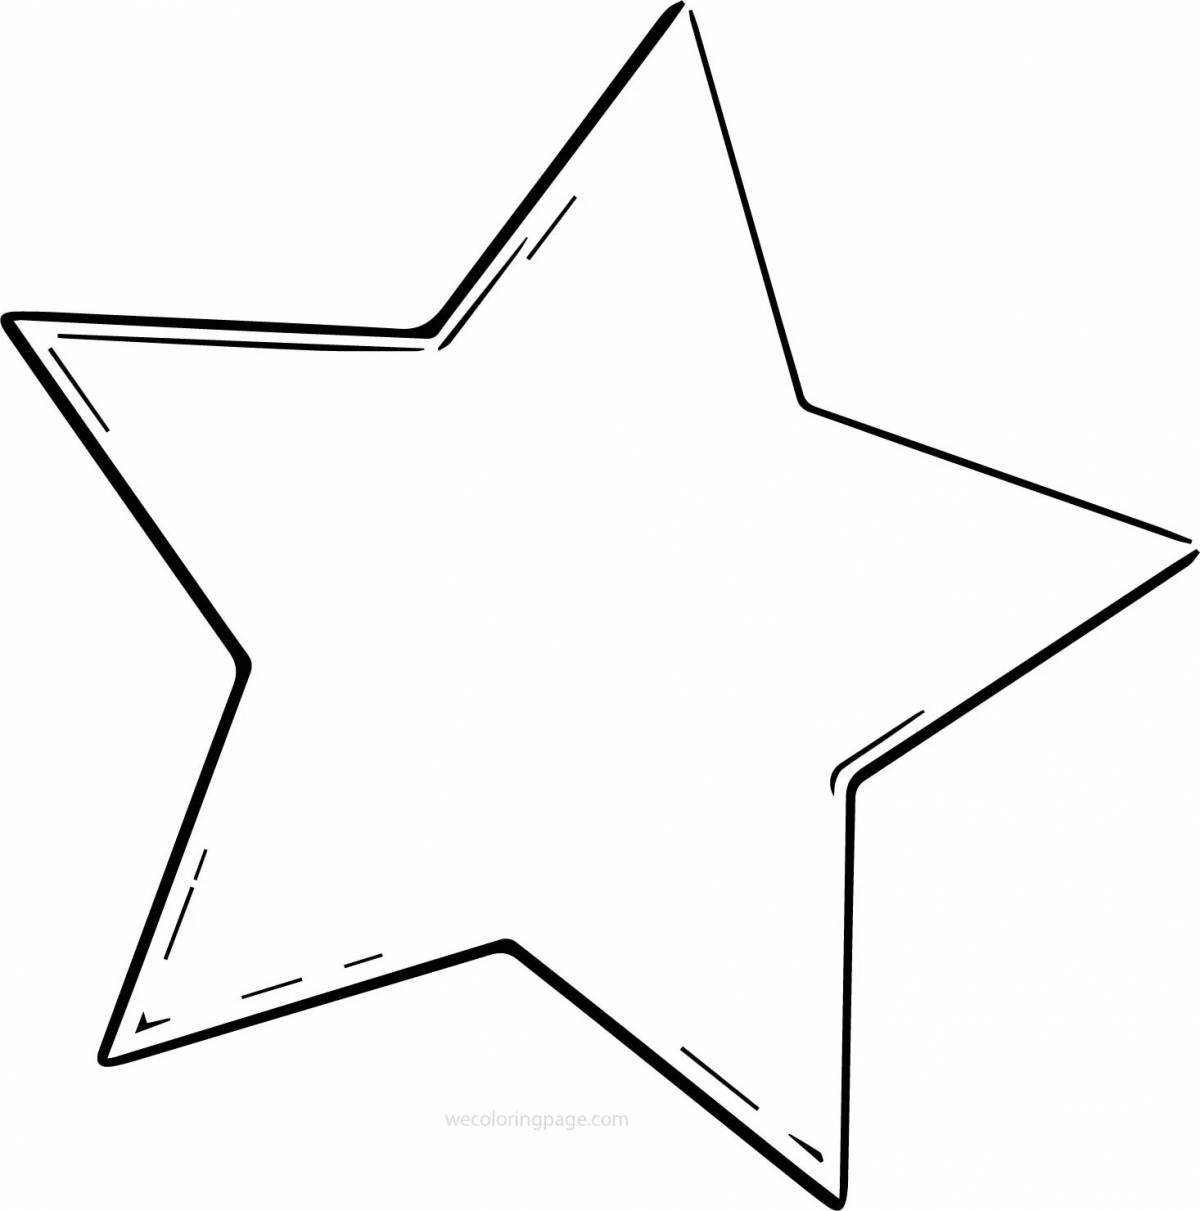 Coloring star for children 3-4 years old